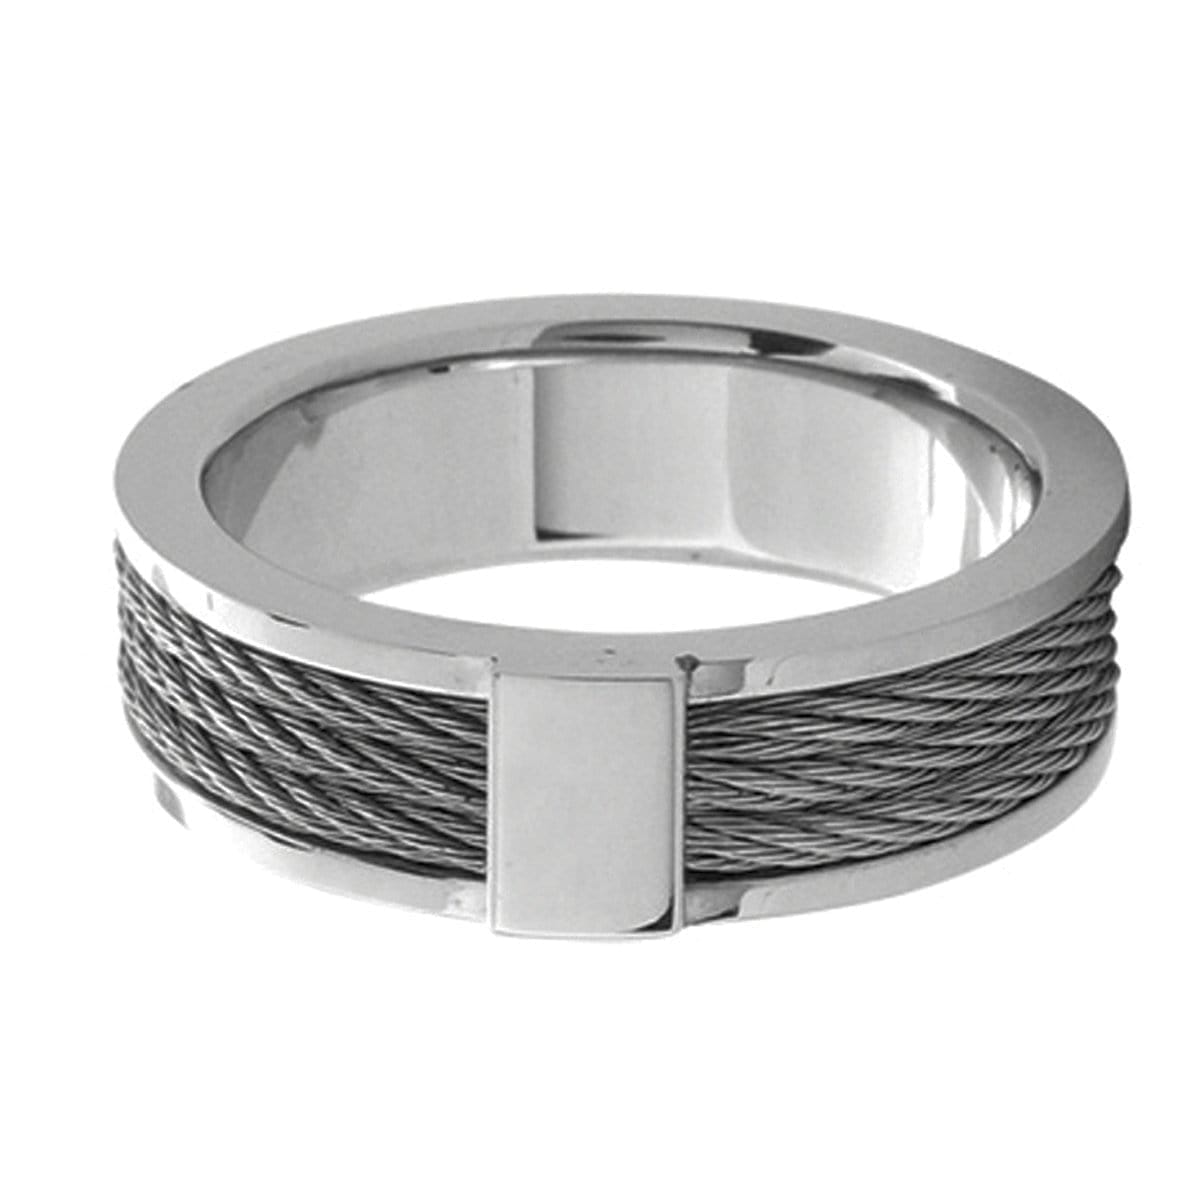 INOX JEWELRY Rings Silver Tone Stainless Steel Ring with Three Inlaid Cables